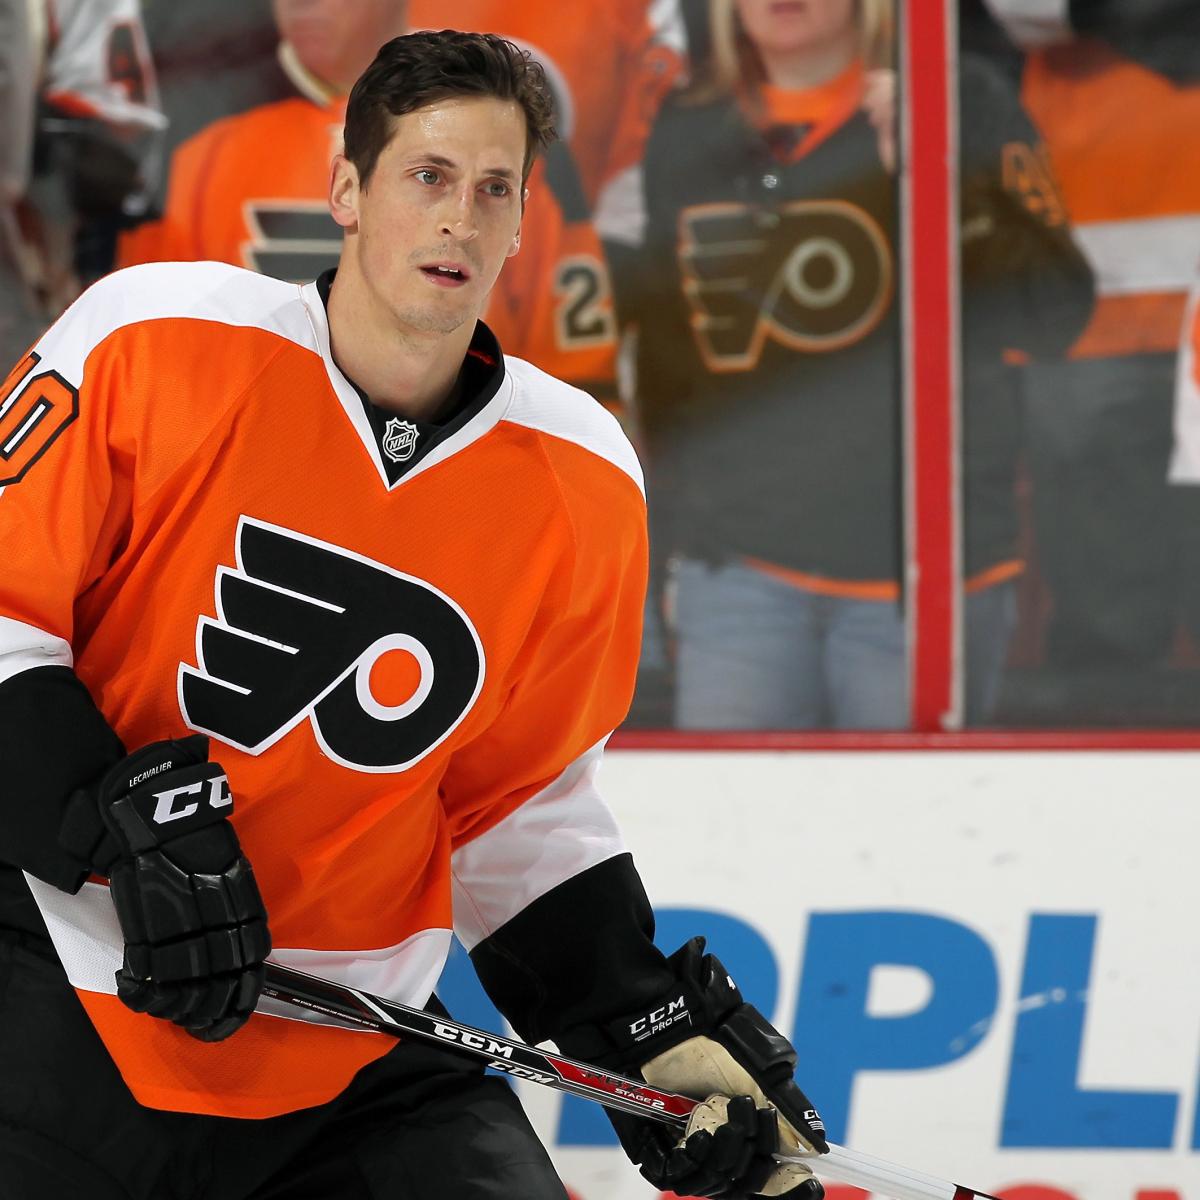 Sportsbash Wednesday: All Over the Vincent Lecavalier Signing